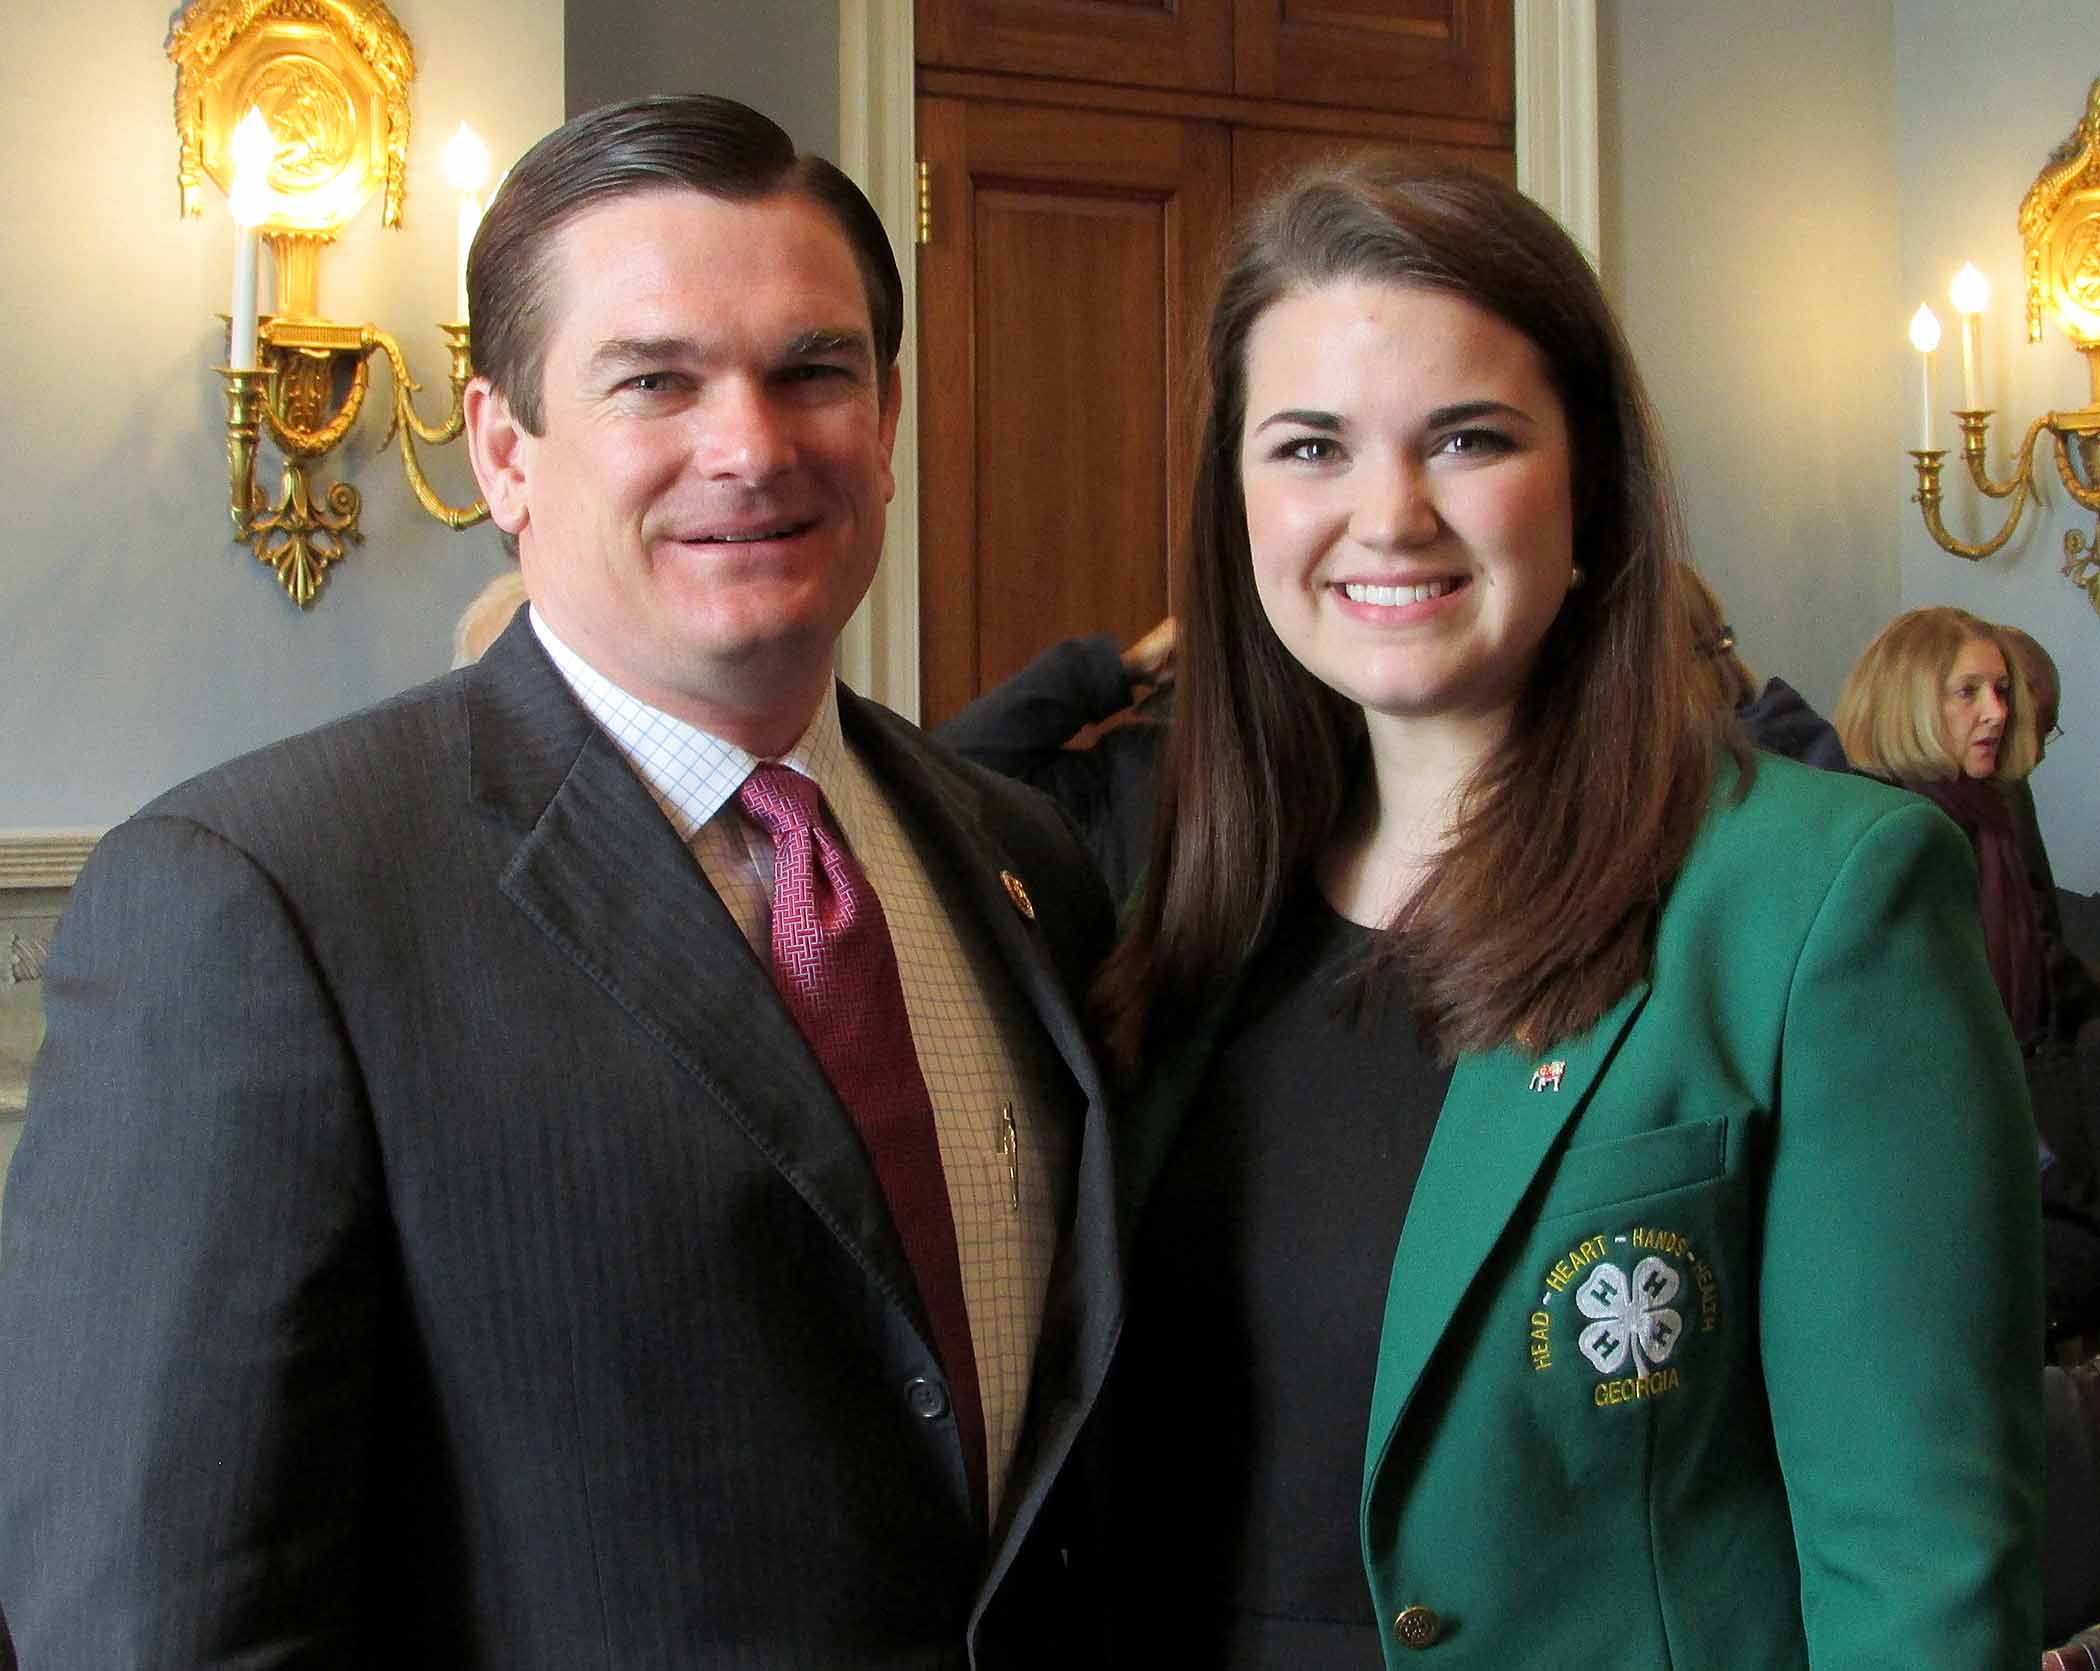 Tess Hammock, right, testified March 4 on behalf of the 7 million 4-H'ers in America. The hearing was held before the U.S. House of Representatives subcommittee on horticulture, research, biotechnology and foreign agriculture, chaired by Rep. Austin Scott (R-Ga.), left.